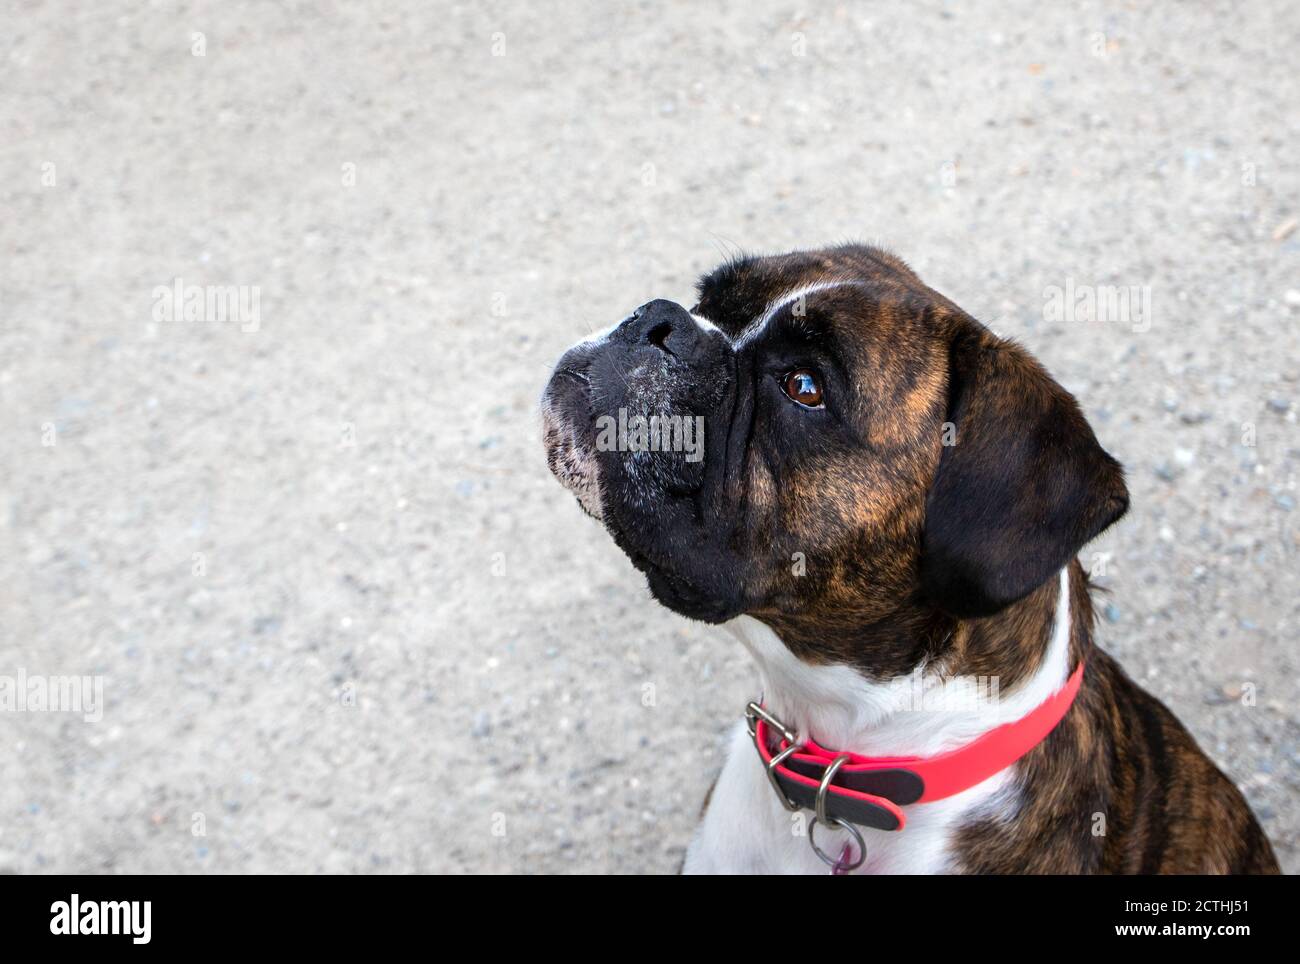 Very attentive dog hoping for a treat. Side view portrait of brindle boxer. 5 year old female dog is sitting outside. Concept for dog training. Stock Photo